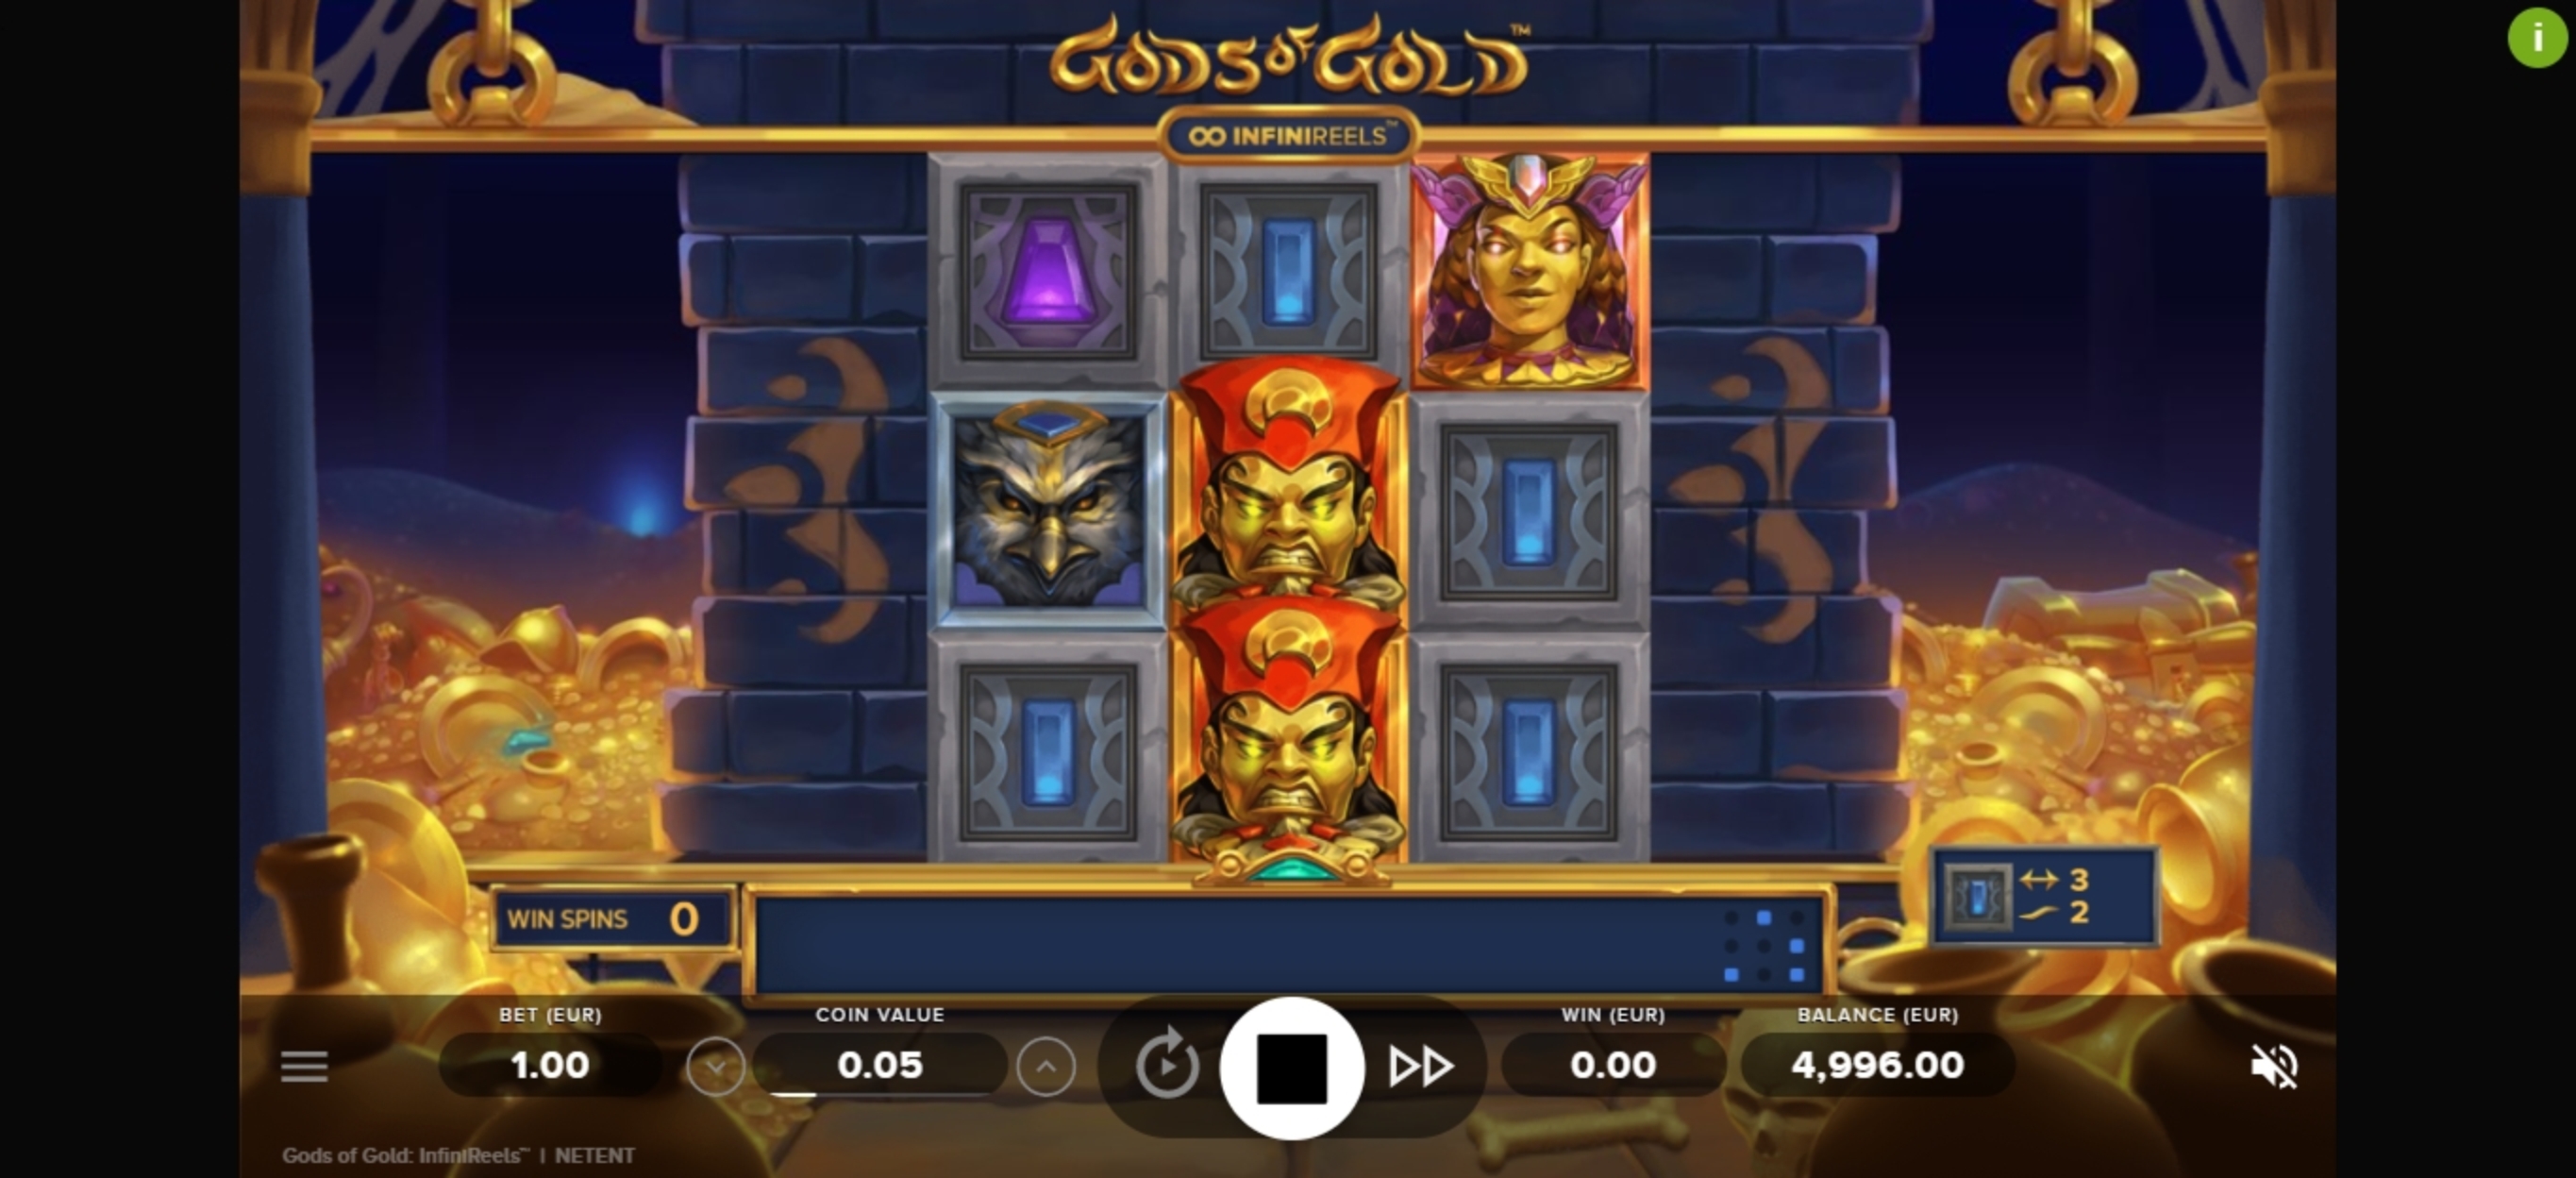 Win Money in Gods of Gold Infinireels Free Slot Game by NetEnt